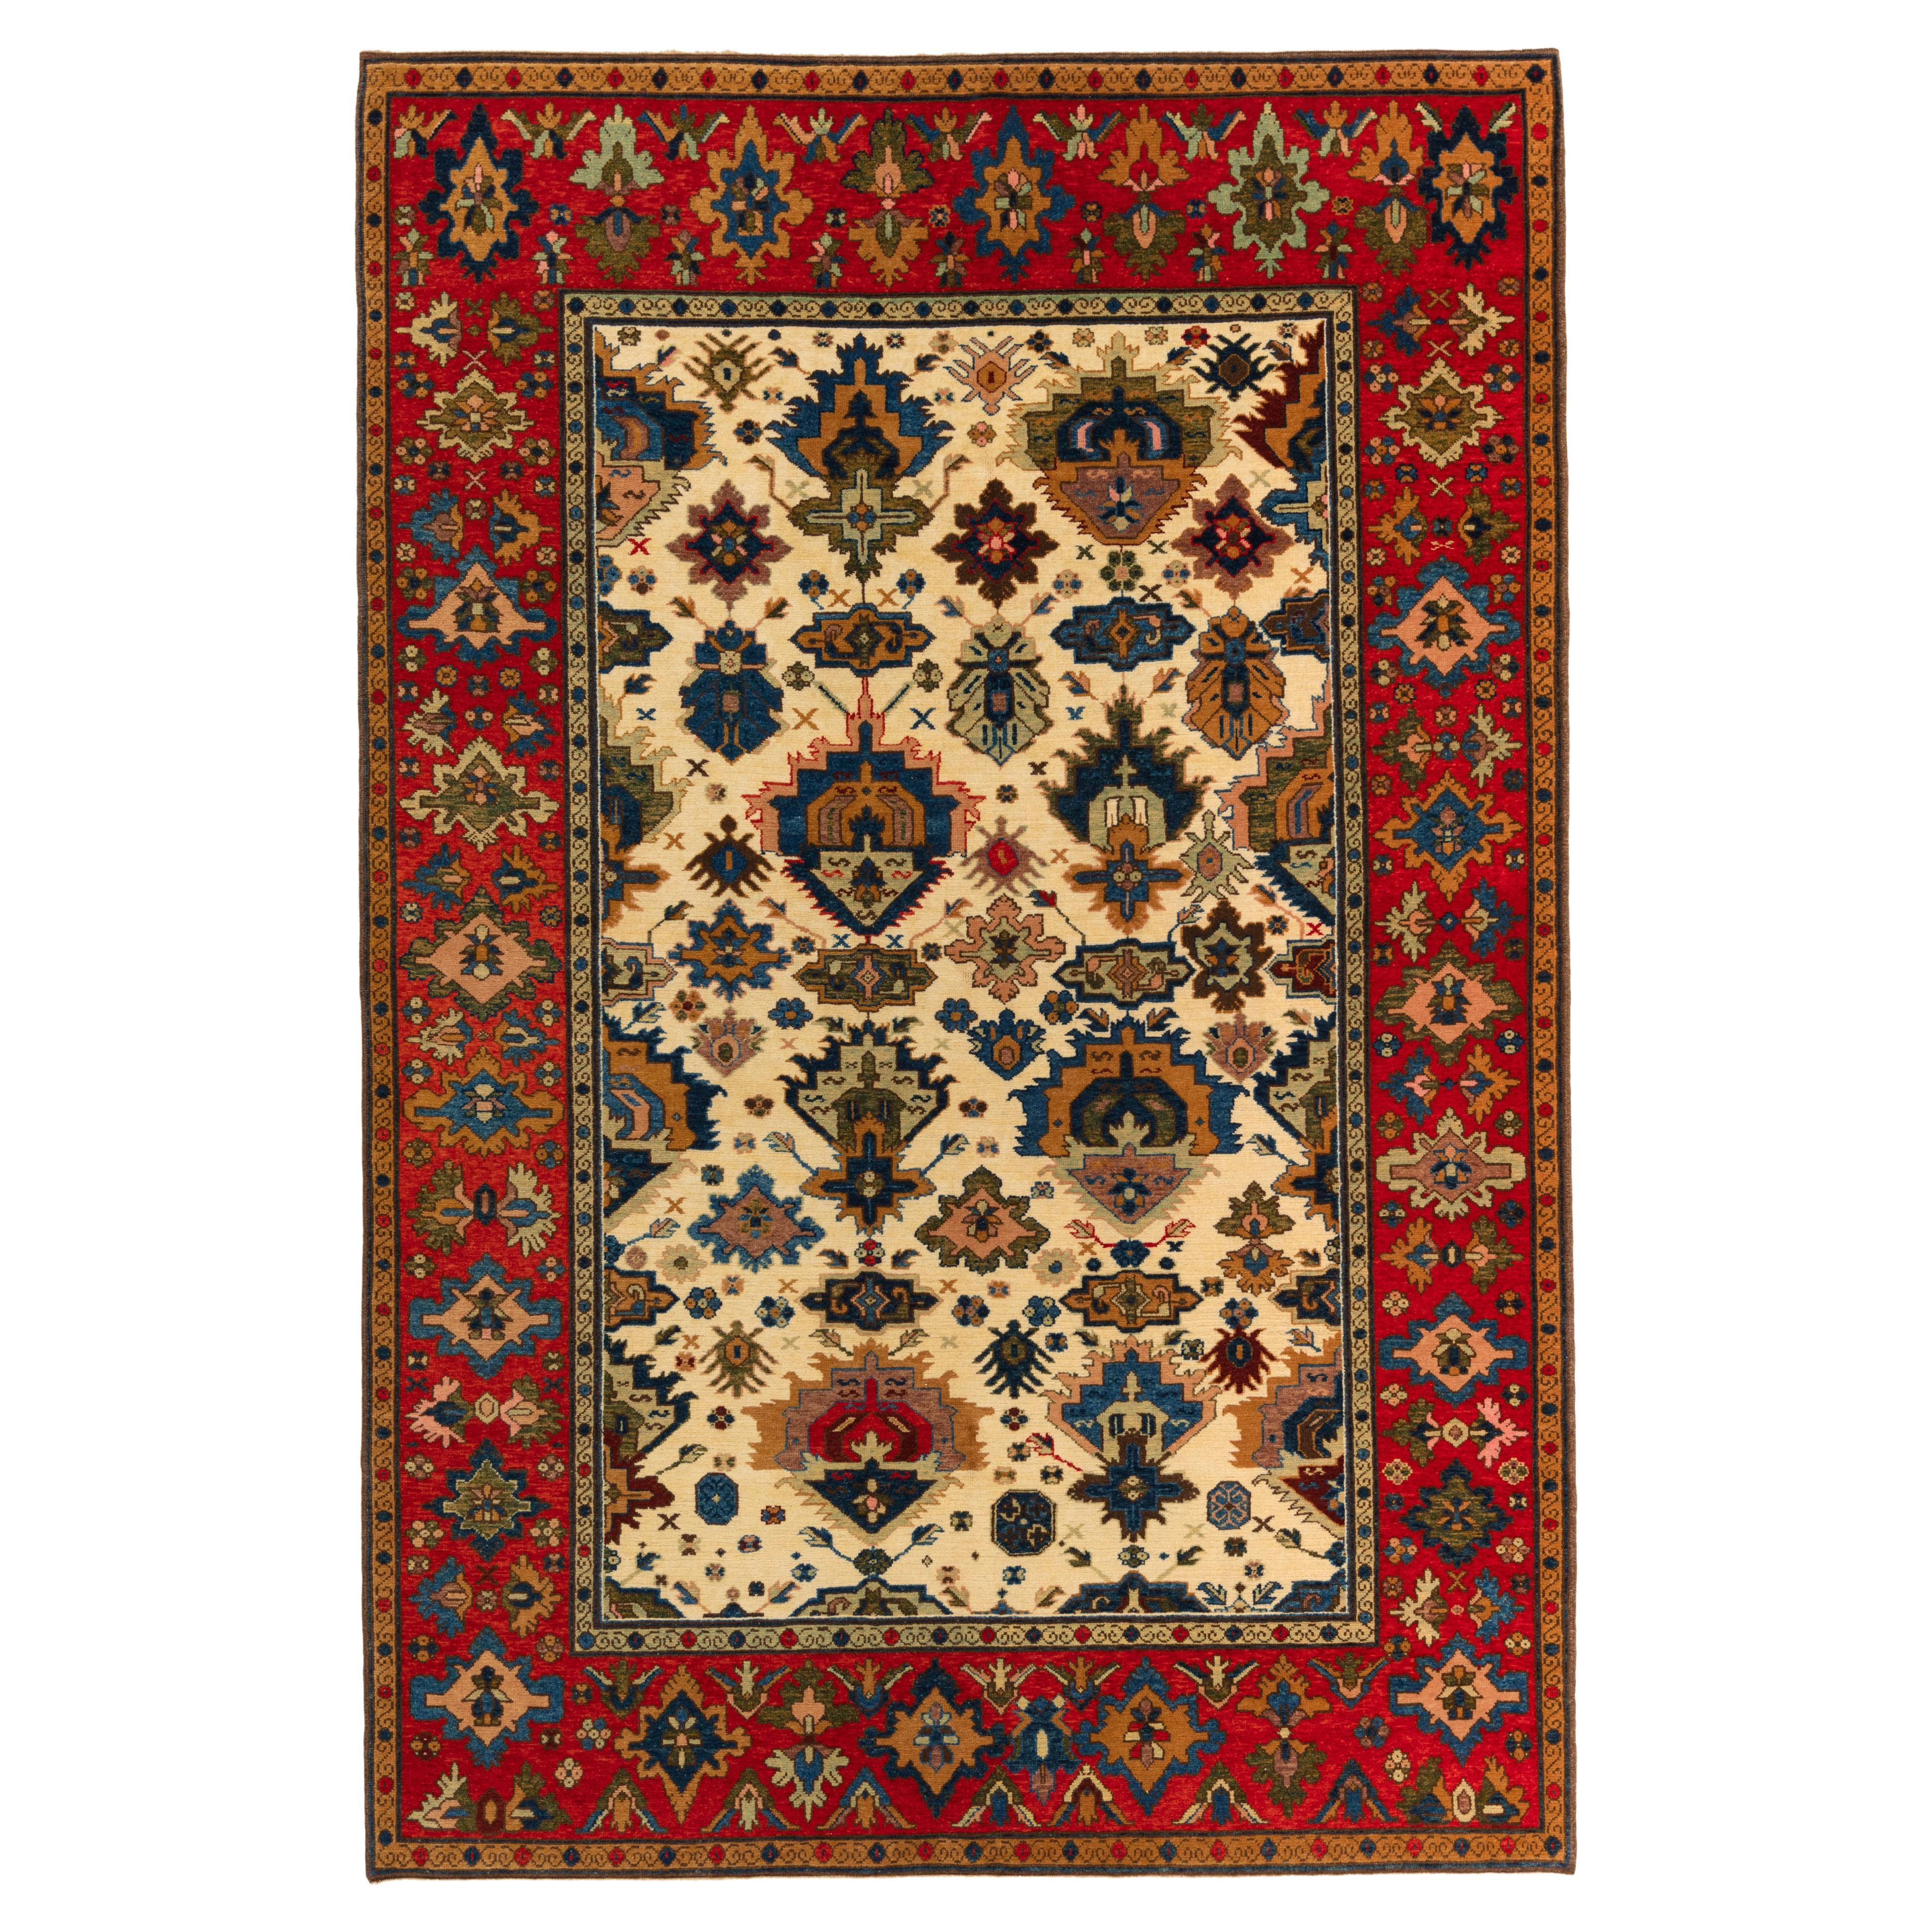 Ararat Rugs Palmettes in the Esfahan Manner Rug, Revival Carpet, Natural Dyed